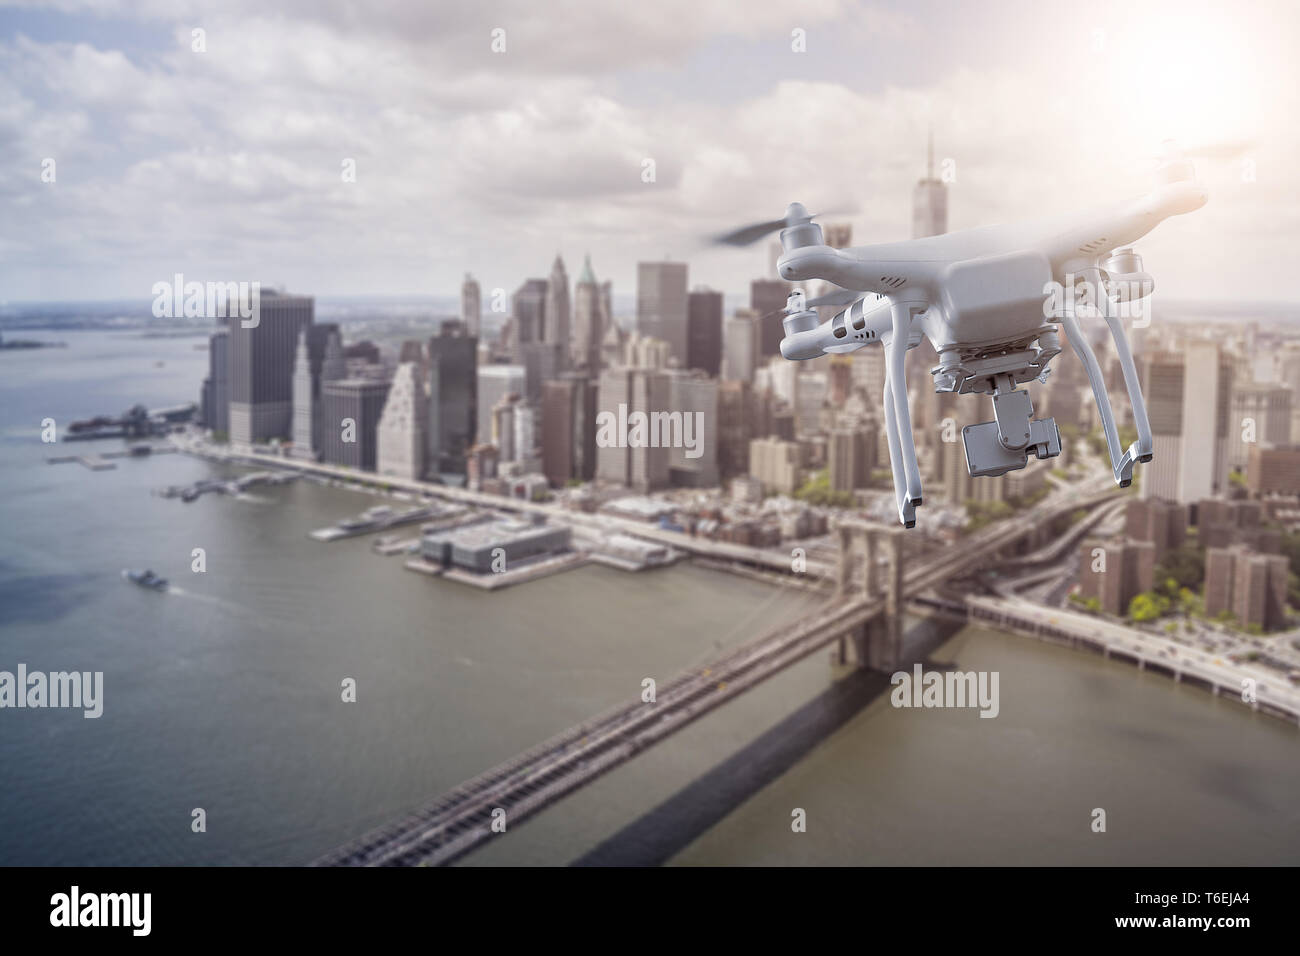 Multicopter flying over New York City Stock Photo